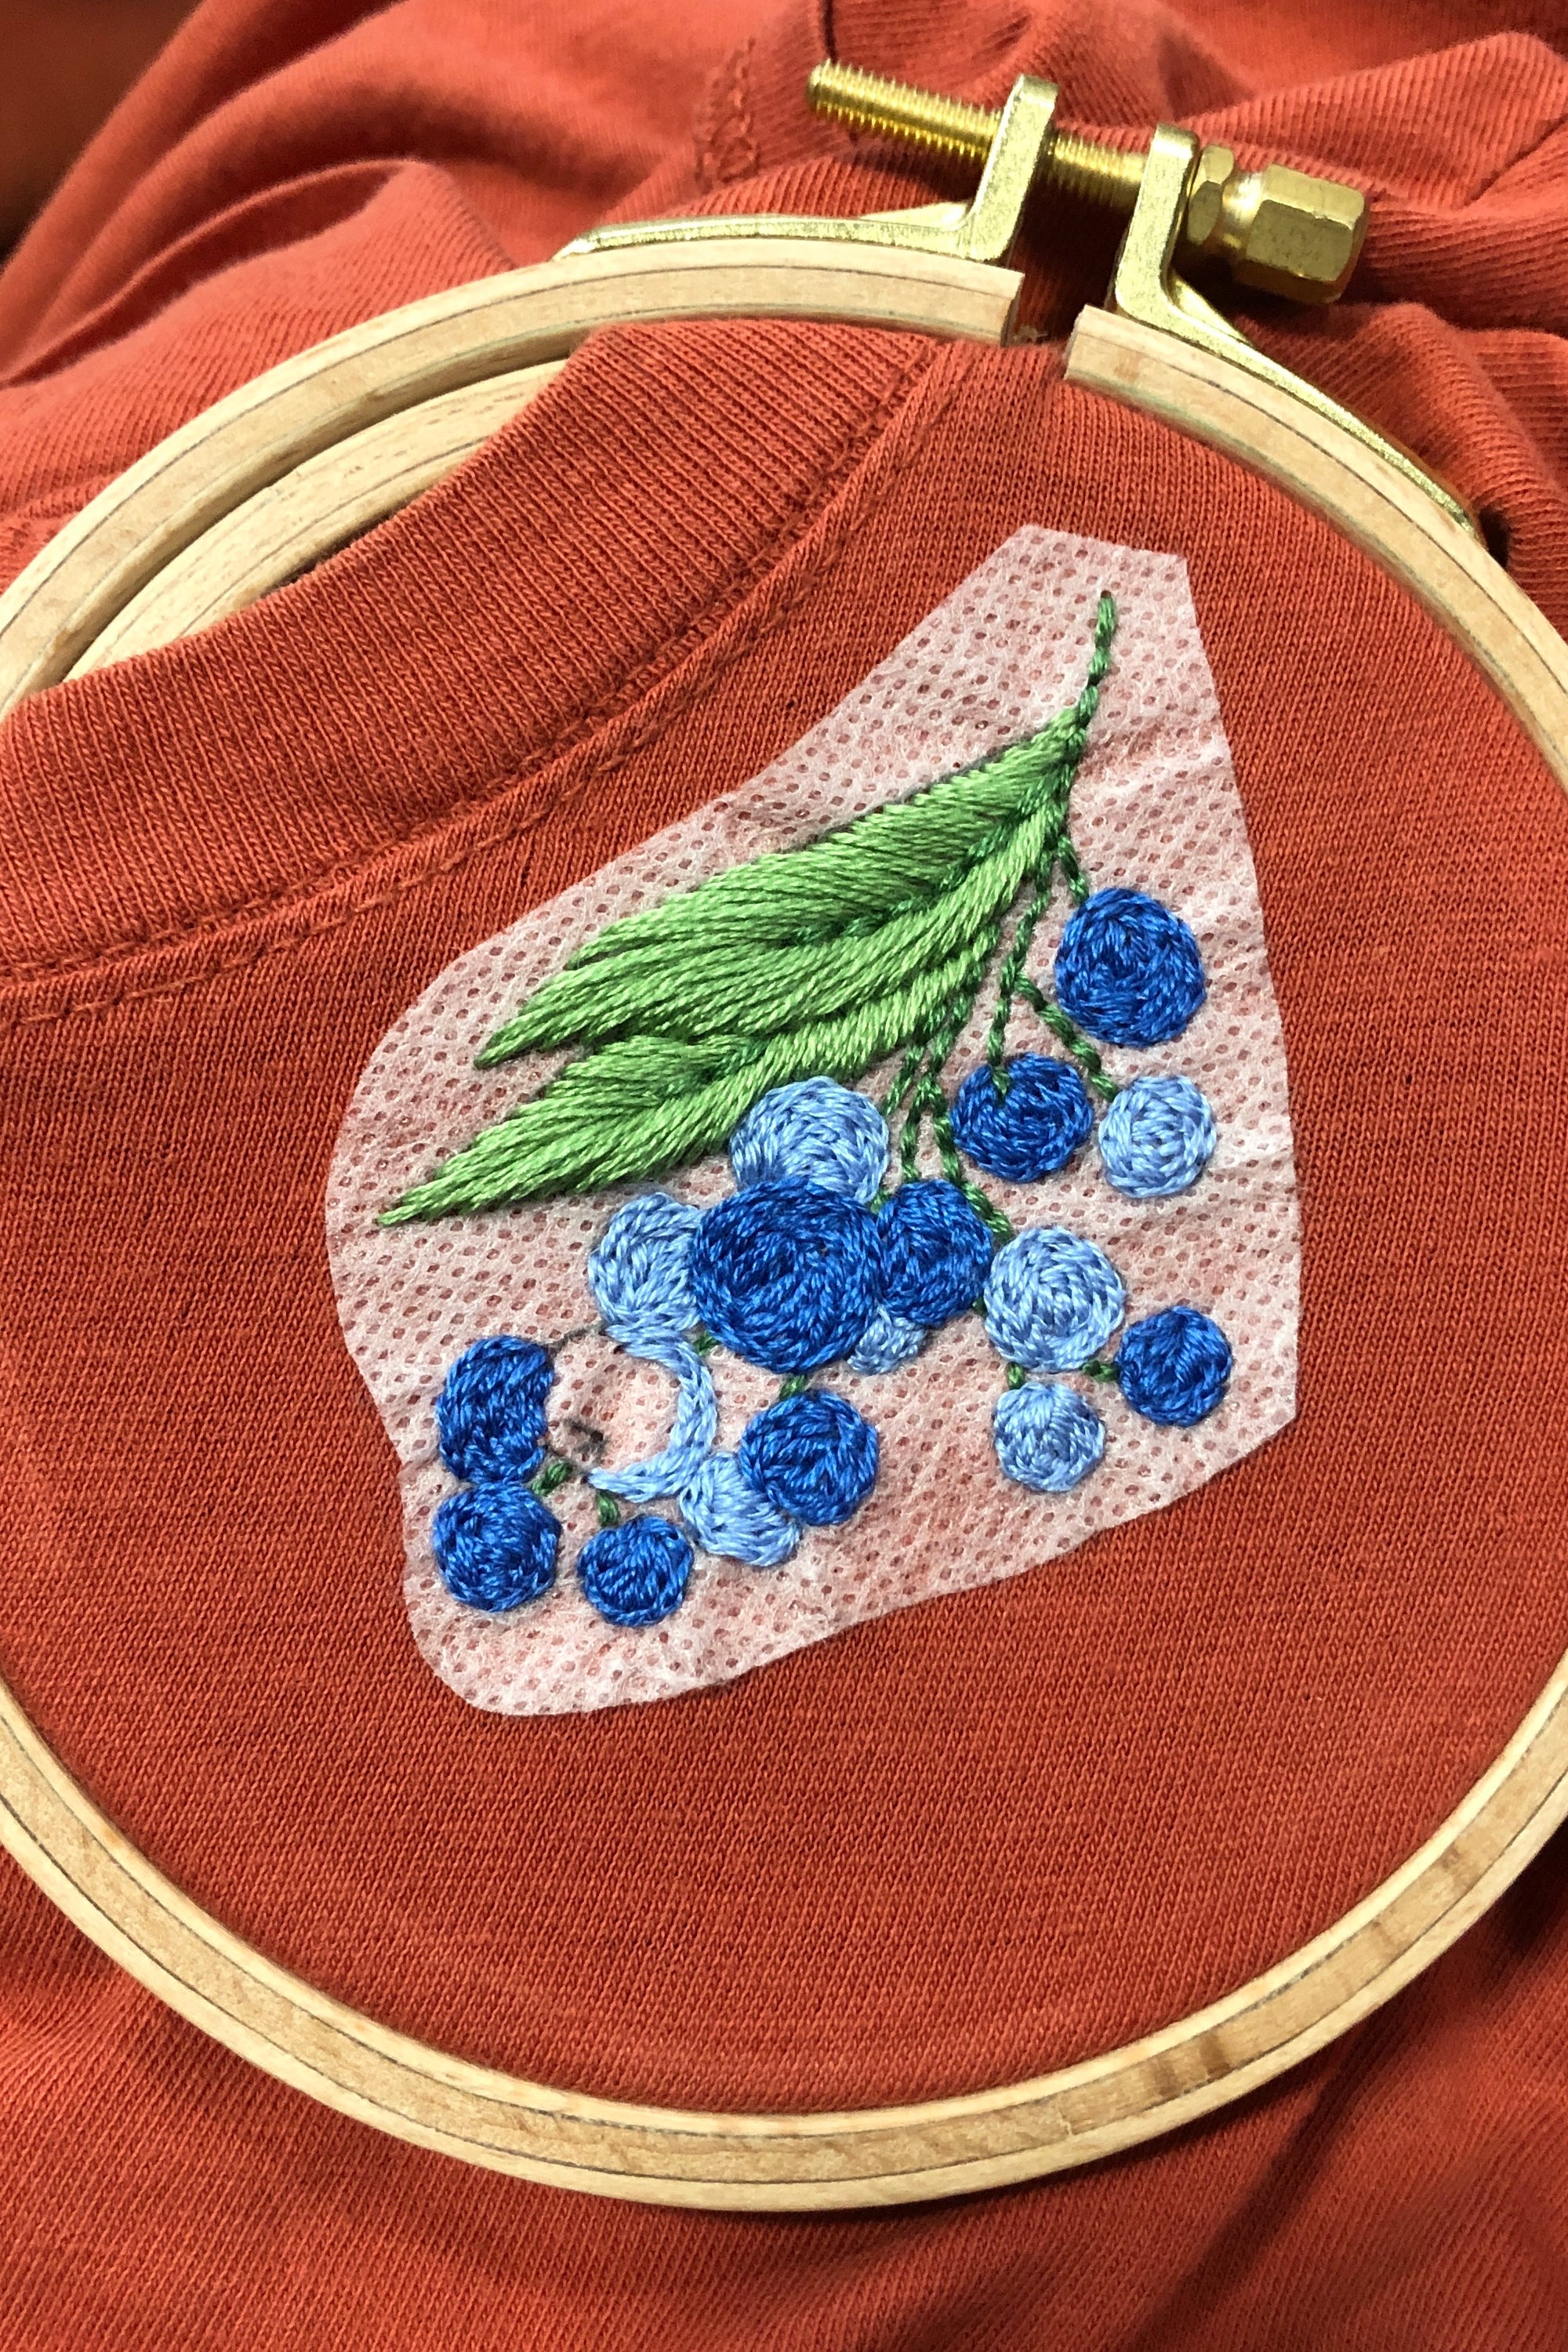 Upcycle Your Clothing with Hand Embroidery / May 11th, 6:30-8:30